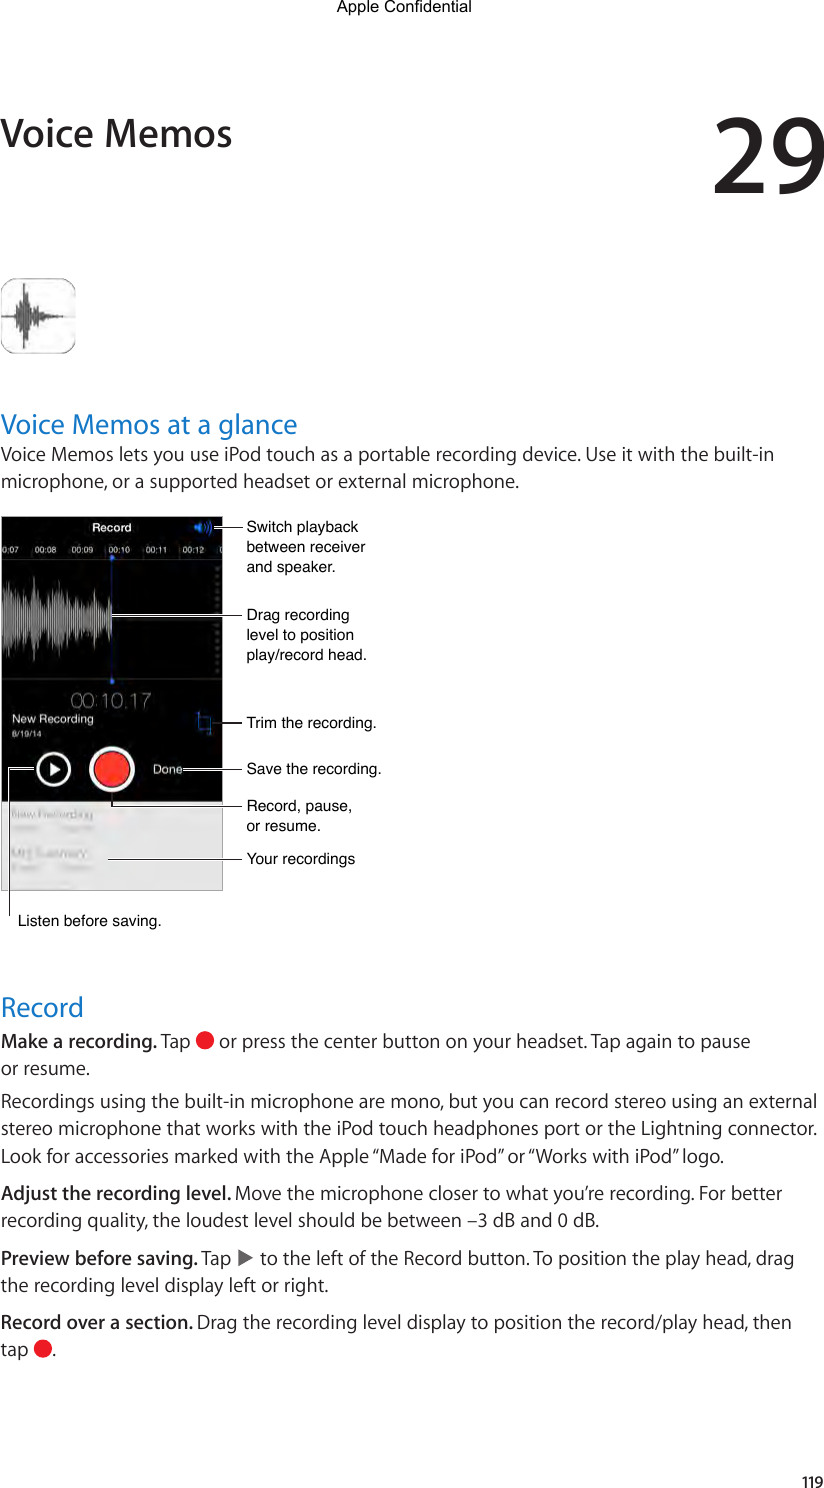 29119Voice Memos at a glanceVoice Memos lets you use iPod touch as a portable recording device. Use it with the built-in microphone, or a supported headset or external microphone.Drag recording level to position play/record head.Drag recording level to position play/record head.Record, pause, or resume.Record, pause, or resume.Trim the recording.Trim the recording.Switch playback between receiver and speaker.Switch playback between receiver and speaker.Save the recording.Save the recording.Your recordingsYour recordingsListen before saving.Listen before saving.RecordMake a recording. Tap   or press the center button on your headset. Tap again to pause or resume.Recordings using the built-in microphone are mono, but you can record stereo using an external stereo microphone that works with the iPod touch headphones port or the Lightning connector. Look for accessories marked with the Apple “Made for iPod” or “Works with iPod” logo.Adjust the recording level. Move the microphone closer to what you’re recording. For better recording quality, the loudest level should be between –3 dB and 0 dB.Preview before saving. Tap   to the left of the Record button. To position the play head, drag the recording level display left or right.Record over a section. Drag the recording level display to position the record/play head, then tap  .Voice MemosApple Confidential